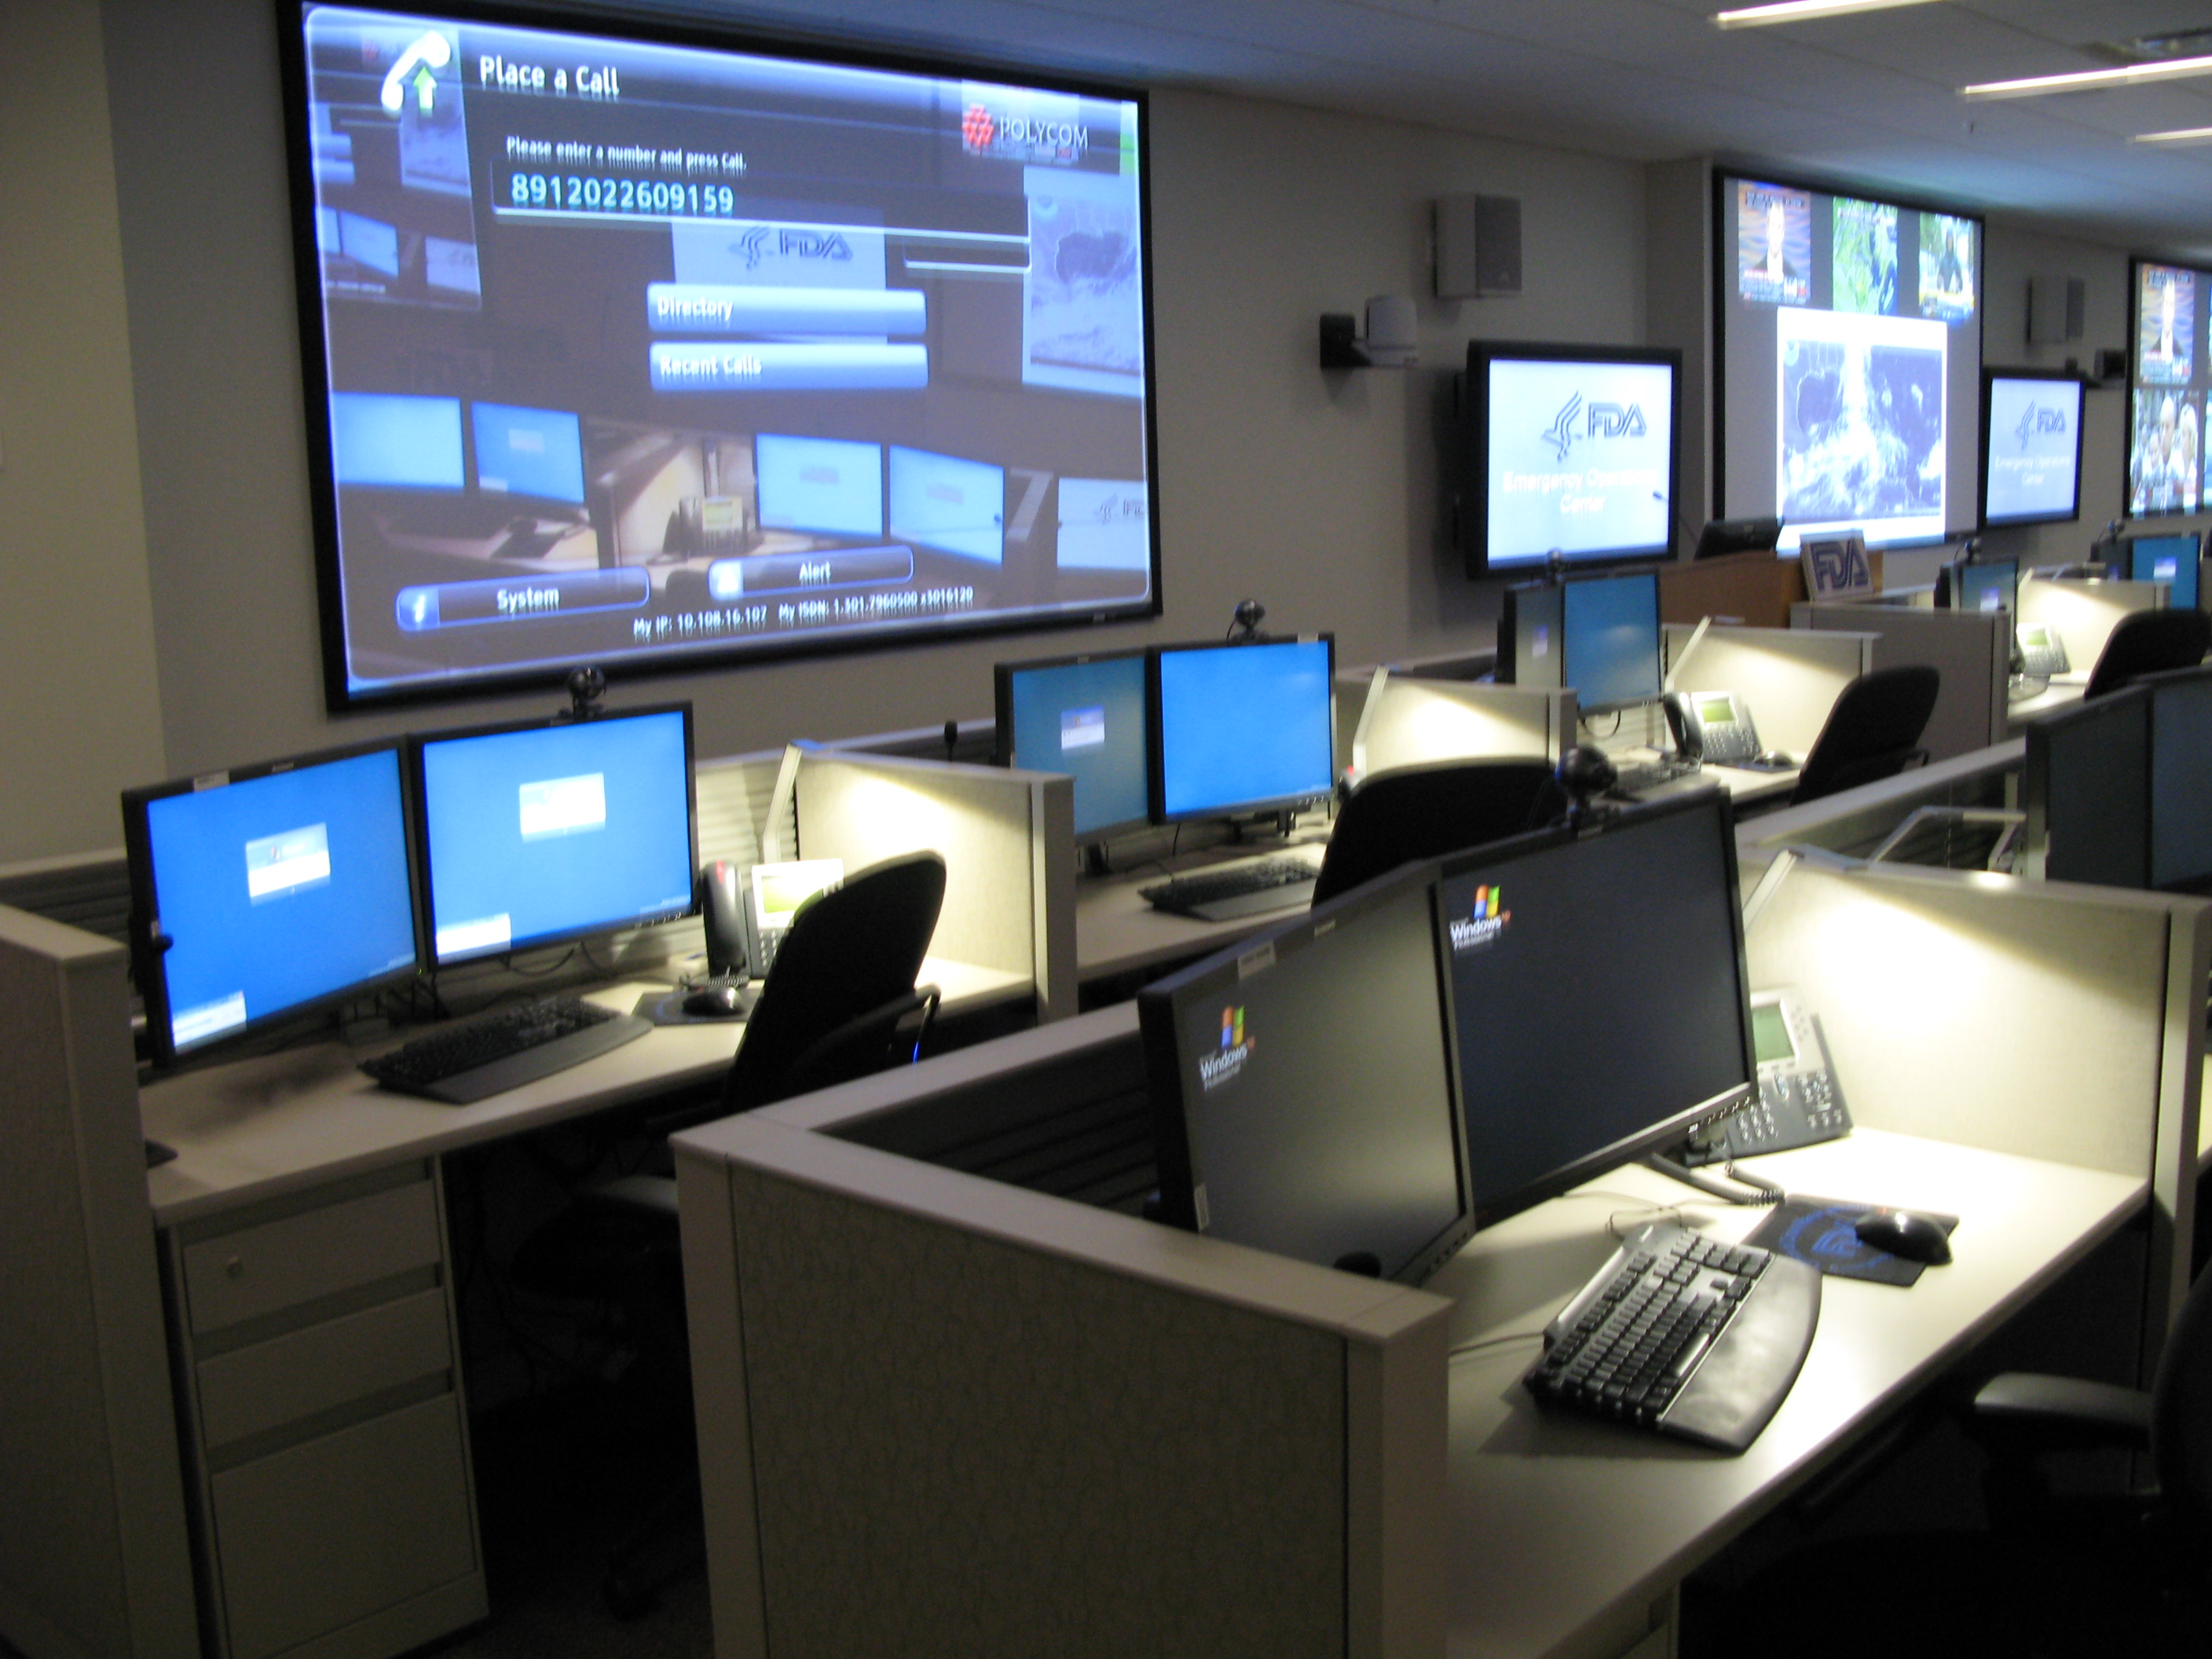 Front desk and screens in the Emergency Operations Center